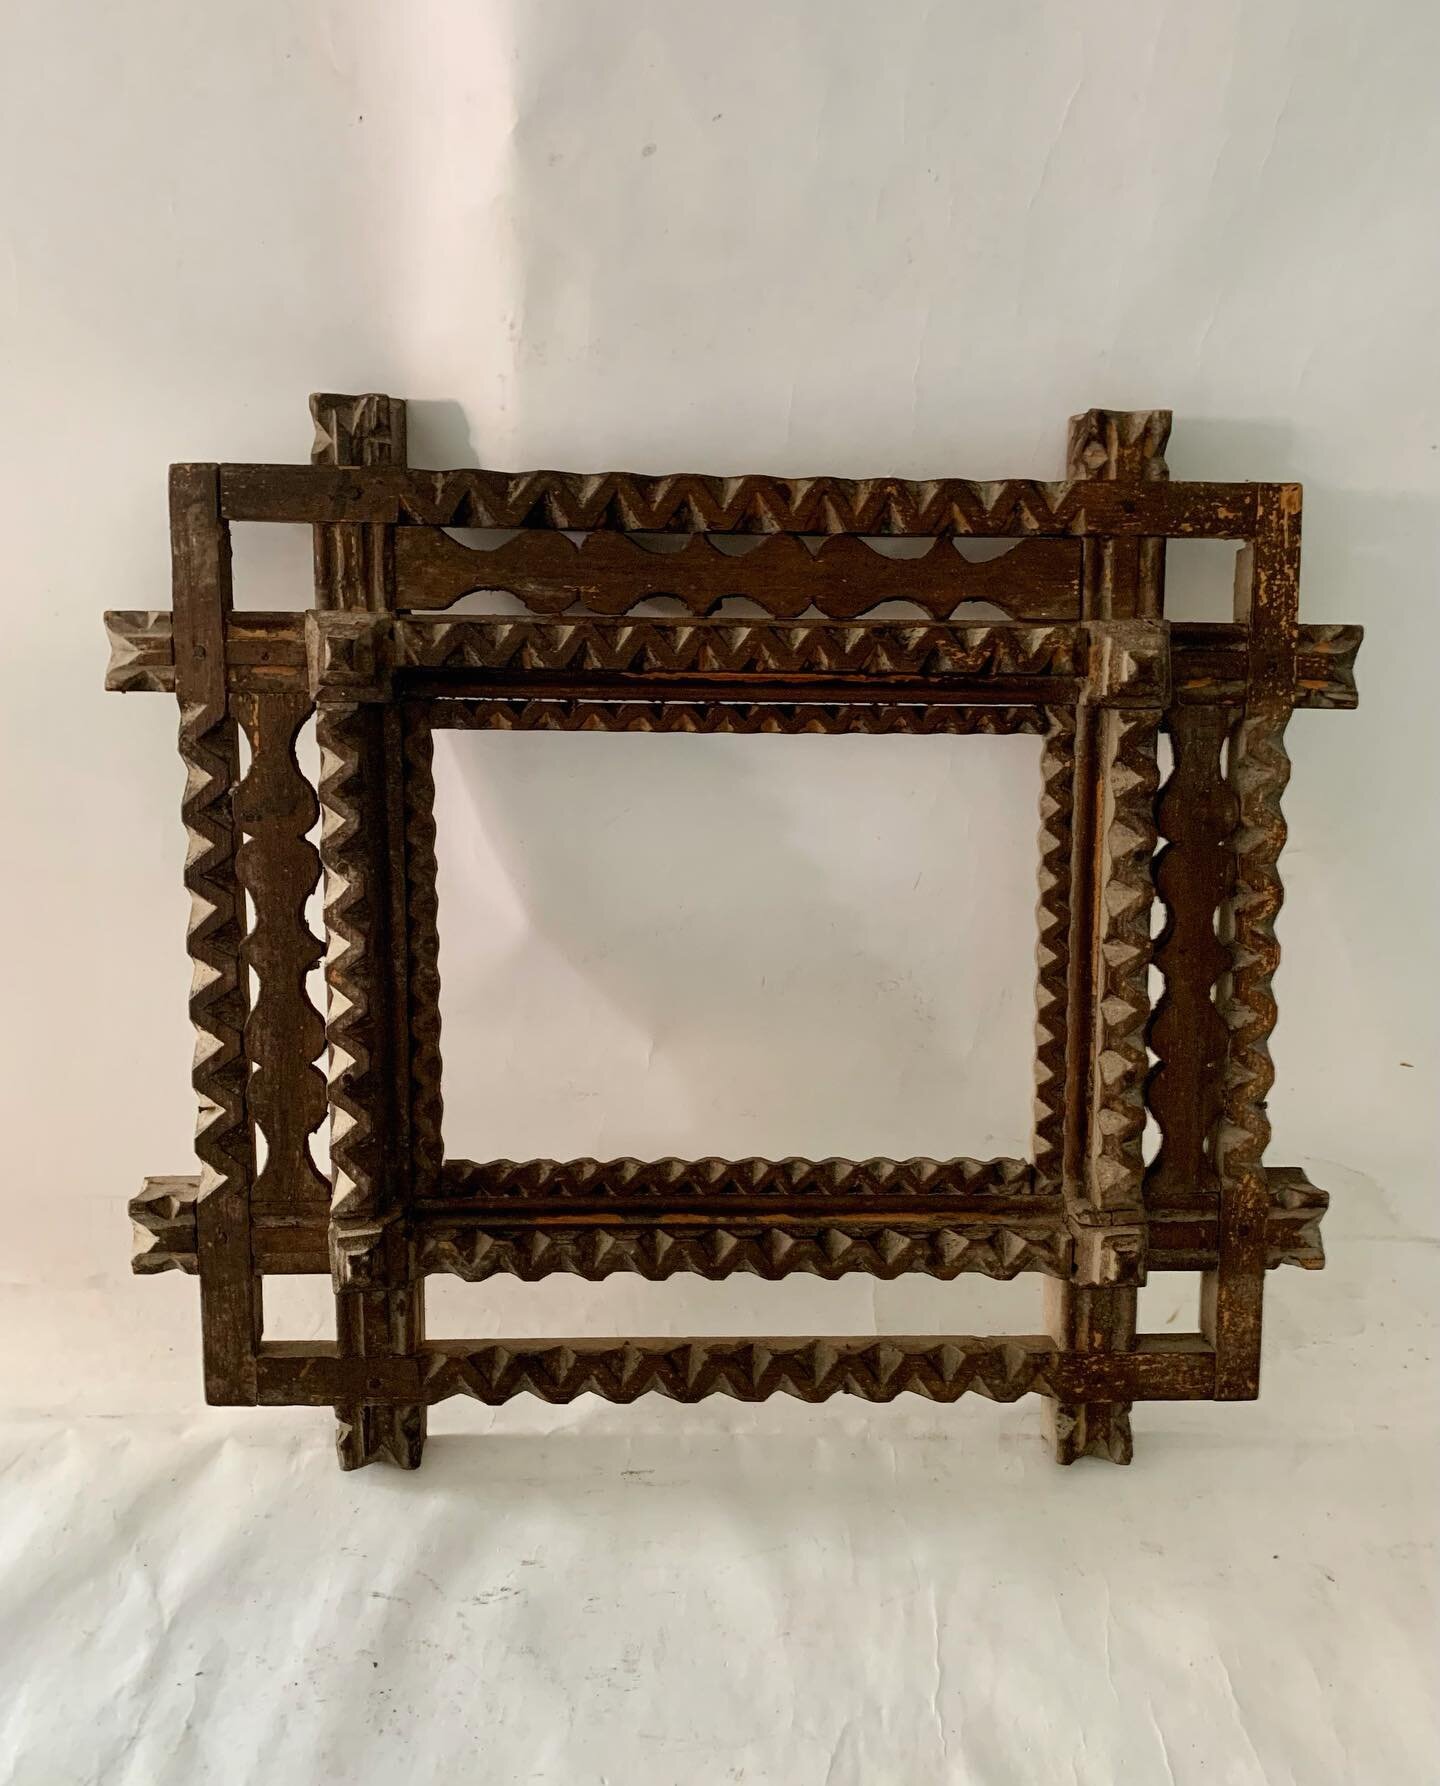 A primitive chip carved folky tramp art frame just add a pic of me $115.00 #citycountrycottagecabin #folkart #farmhousedecor #gallerywall #interiors #modernfarmhouse #vintagefineobjects #dmforinq